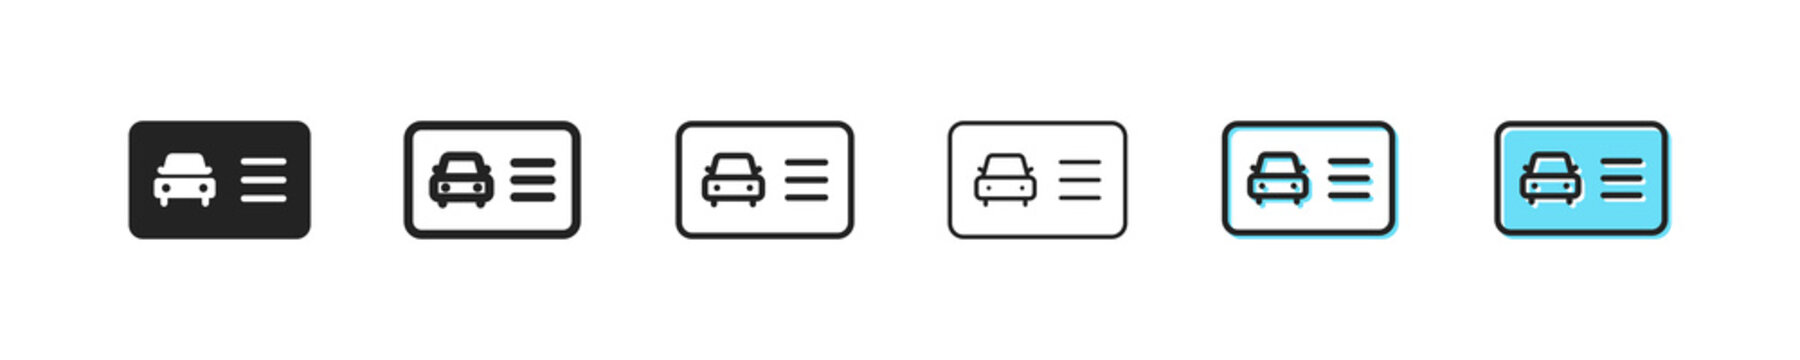 Driver license icon set. Driver id card, MIA. Driver s personal document. Traffic rules concept. Six vector line icon in different styles